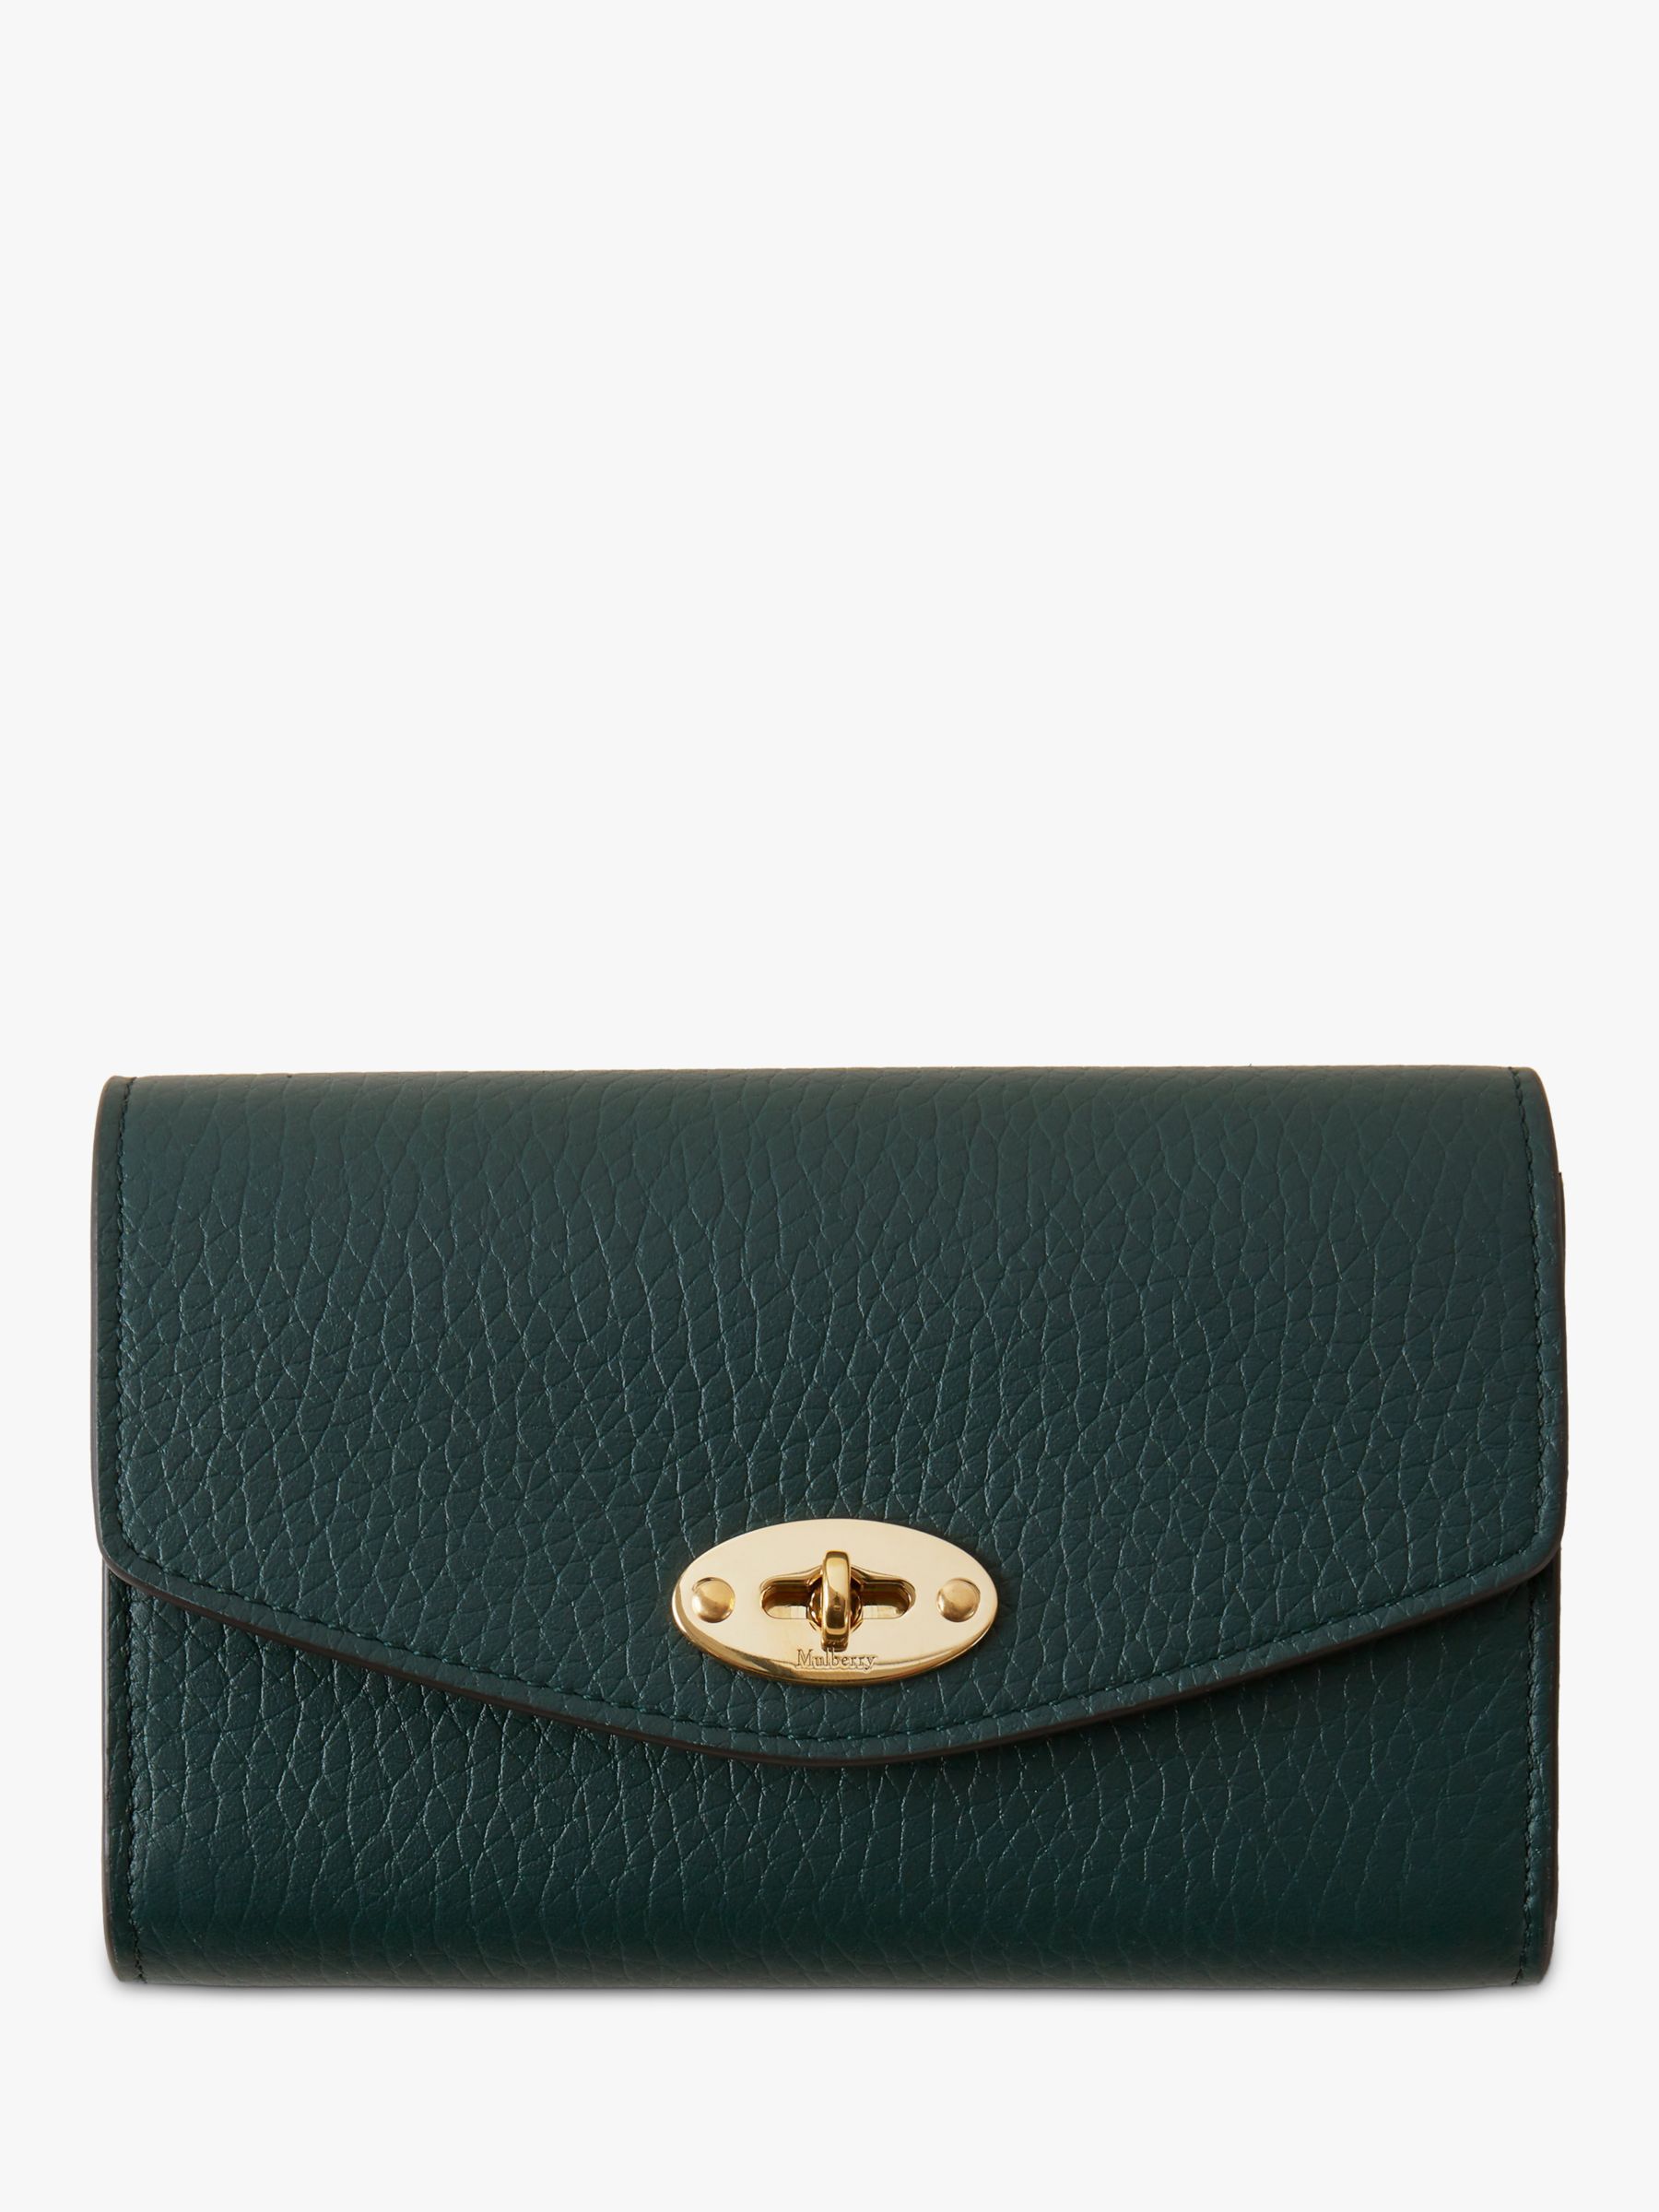 Mulberry Darley Medium Heavy Grain Leather Wallet, Mulberry Green at ...